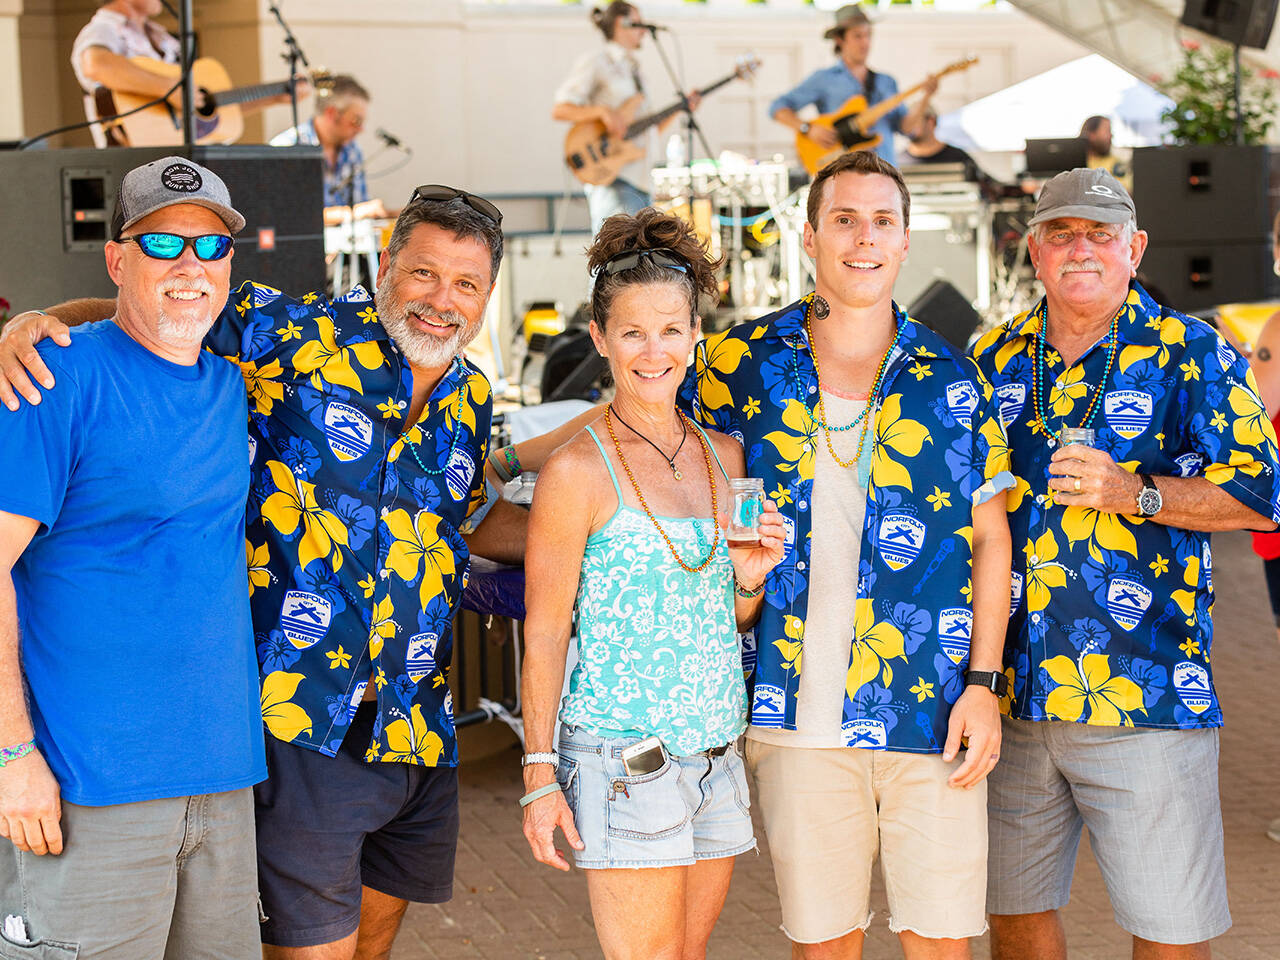 Group posing for photo at Coastal Craft Beer Festival